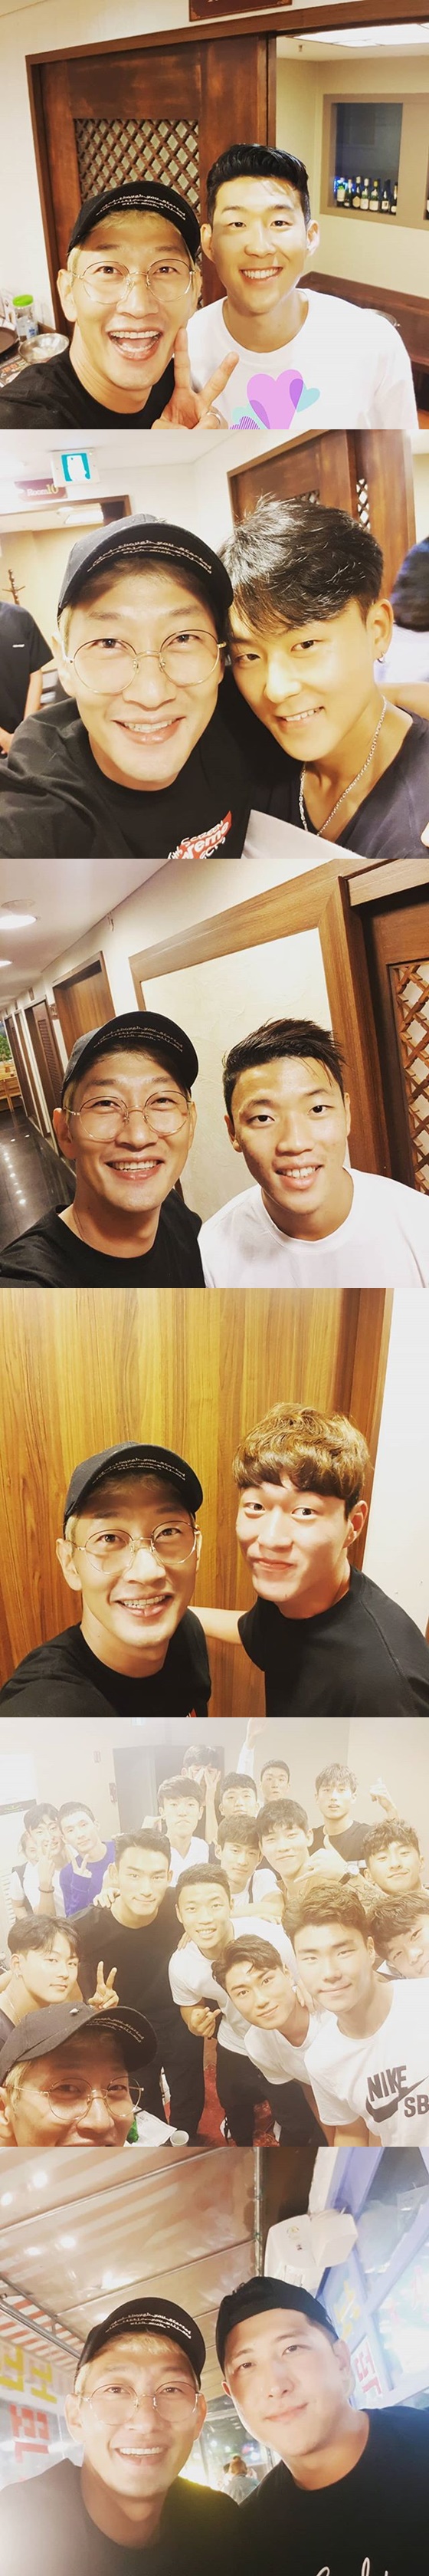 Group DJ DOC member Kim Chang-yeol released photos with Son Heung-min, Hwang Huichan, Lee Seung-woo and Hwang Ui-jo who won gold medals at the 2018 Jakarta - Palembang Asian Game.Kim Chang-yeol wrote on his instagram on the 4th, Football. Baseball. Gold medal. Thank you. Sui Gu. Thank you and hard work.I was happy because I had a lot of such words, but I was happy  I would like to ask you well in the future. In the open photo, Kim Chang-yeol poses with Son Heung-min, Hwang Hui Chan, Lee Seung-woo, Hwang Ui-jo, Hwang Jae-gyun, and 2018 Asian Game national team players.Many netizens who responded to this responded such as I was the best happy! Sui Gu, Sui Gu, and Fighting.Meanwhile, Son Heung-min, Hwang Hui Chan, Lee Seung-woo, Hwang Ui-jo and Hwang Jae-gyun, who took pictures with Kim Chang-yeol, won gold medals at the 2018 Jakarta - Palembang Asian Game, which closed on the 2nd.